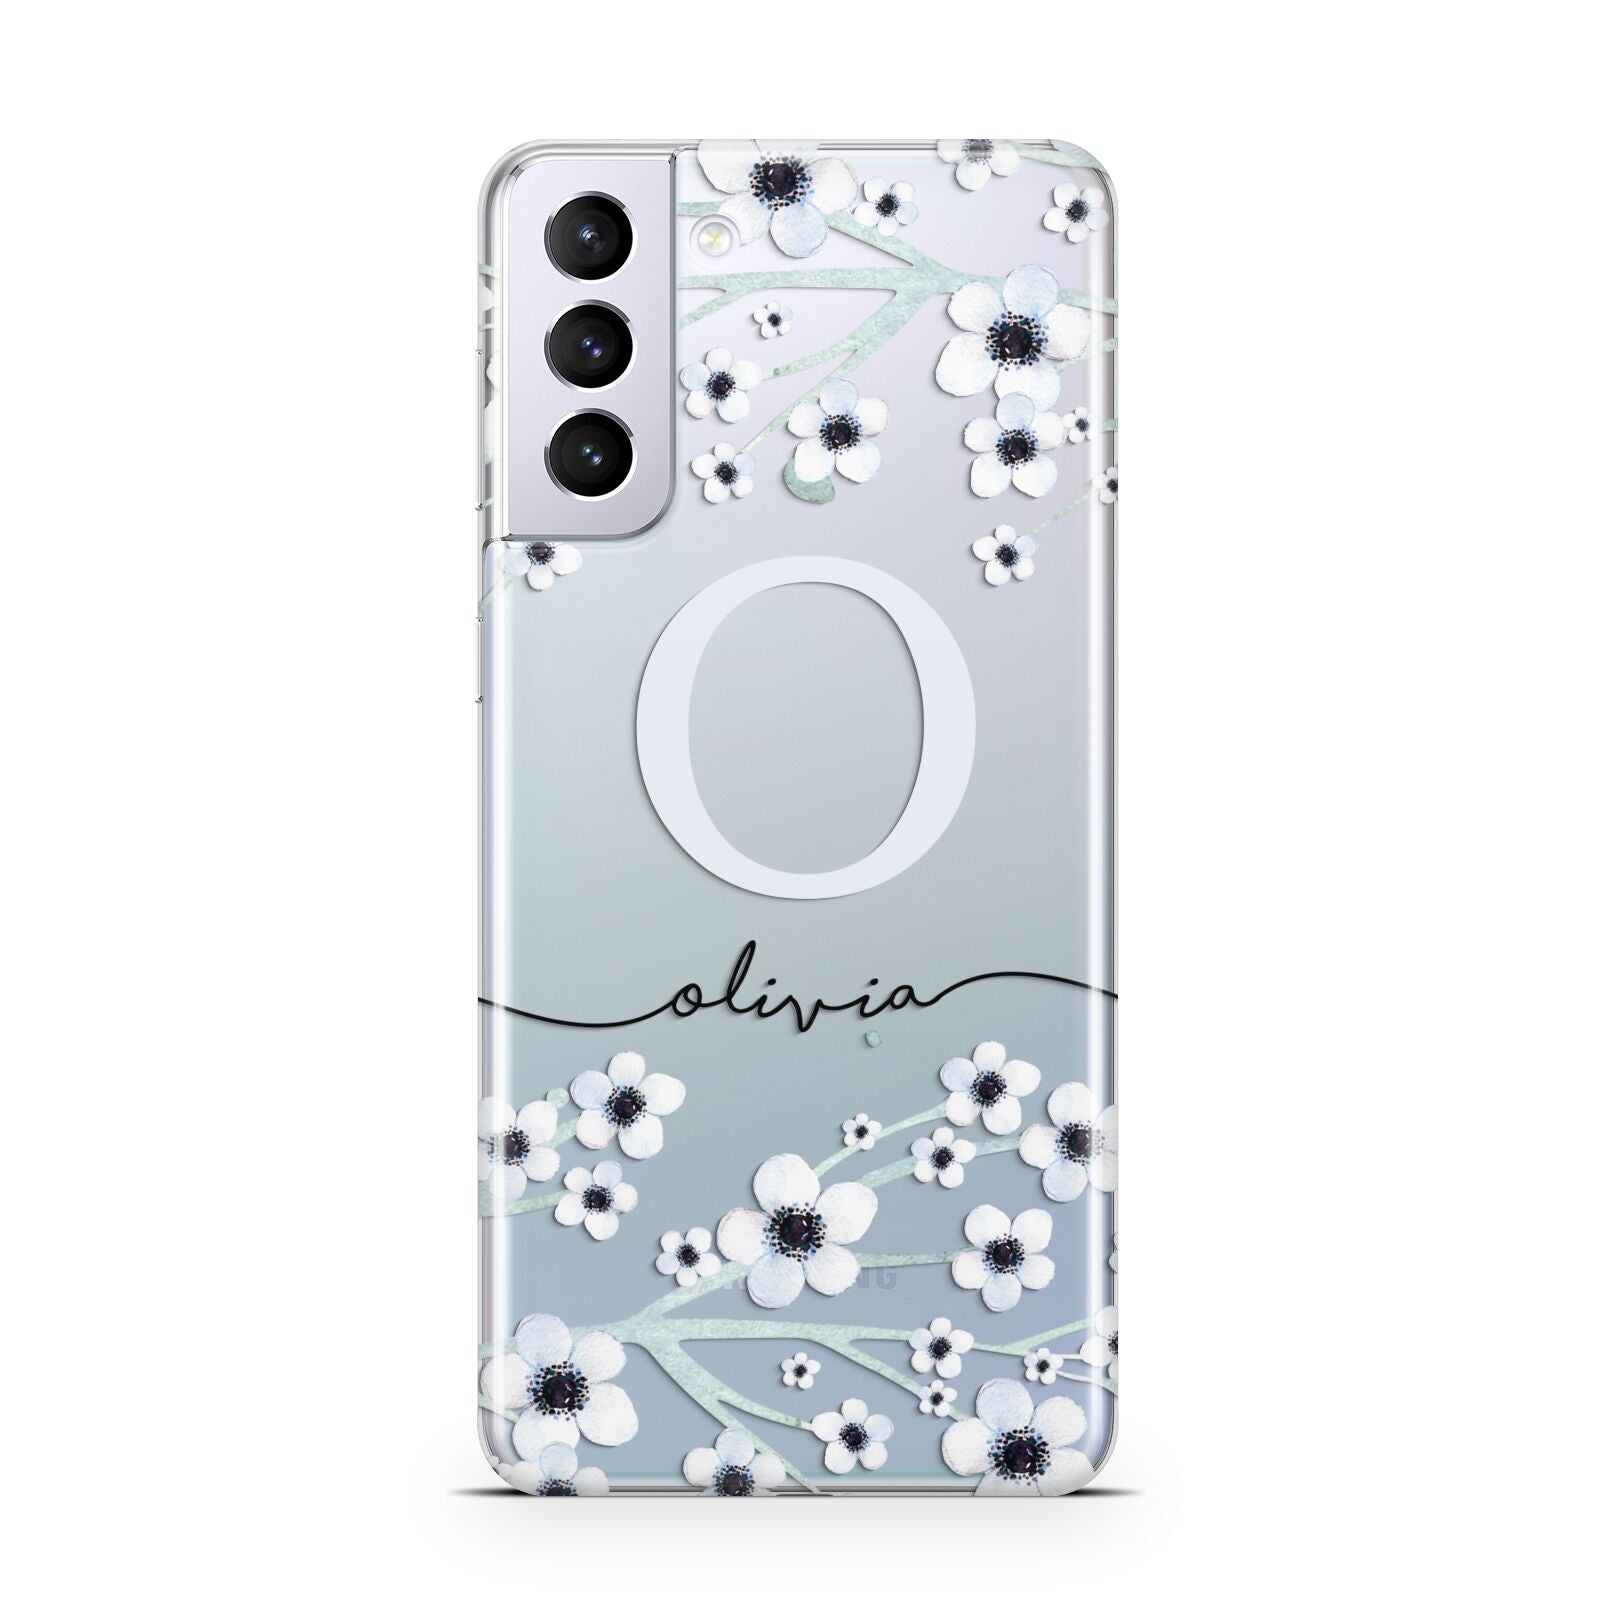 Personalised White Flower Samsung S21 Plus Phone Case